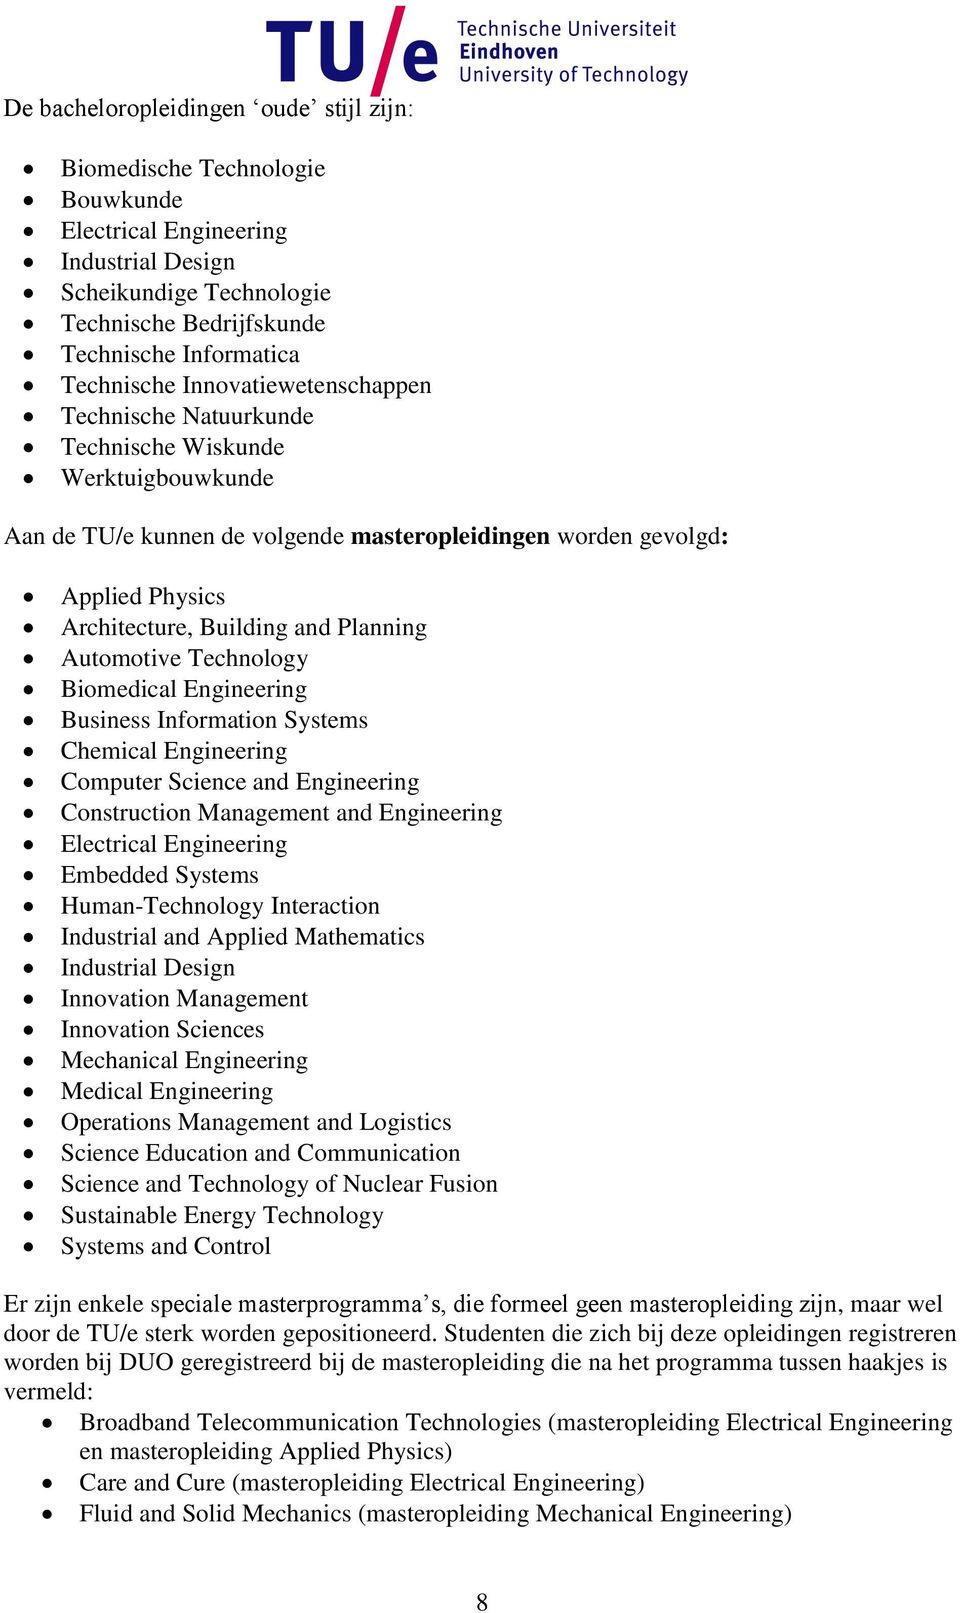 Planning Automotive Technology Biomedical Engineering Business Information Systems Chemical Engineering Computer Science and Engineering Construction Management and Engineering Electrical Engineering